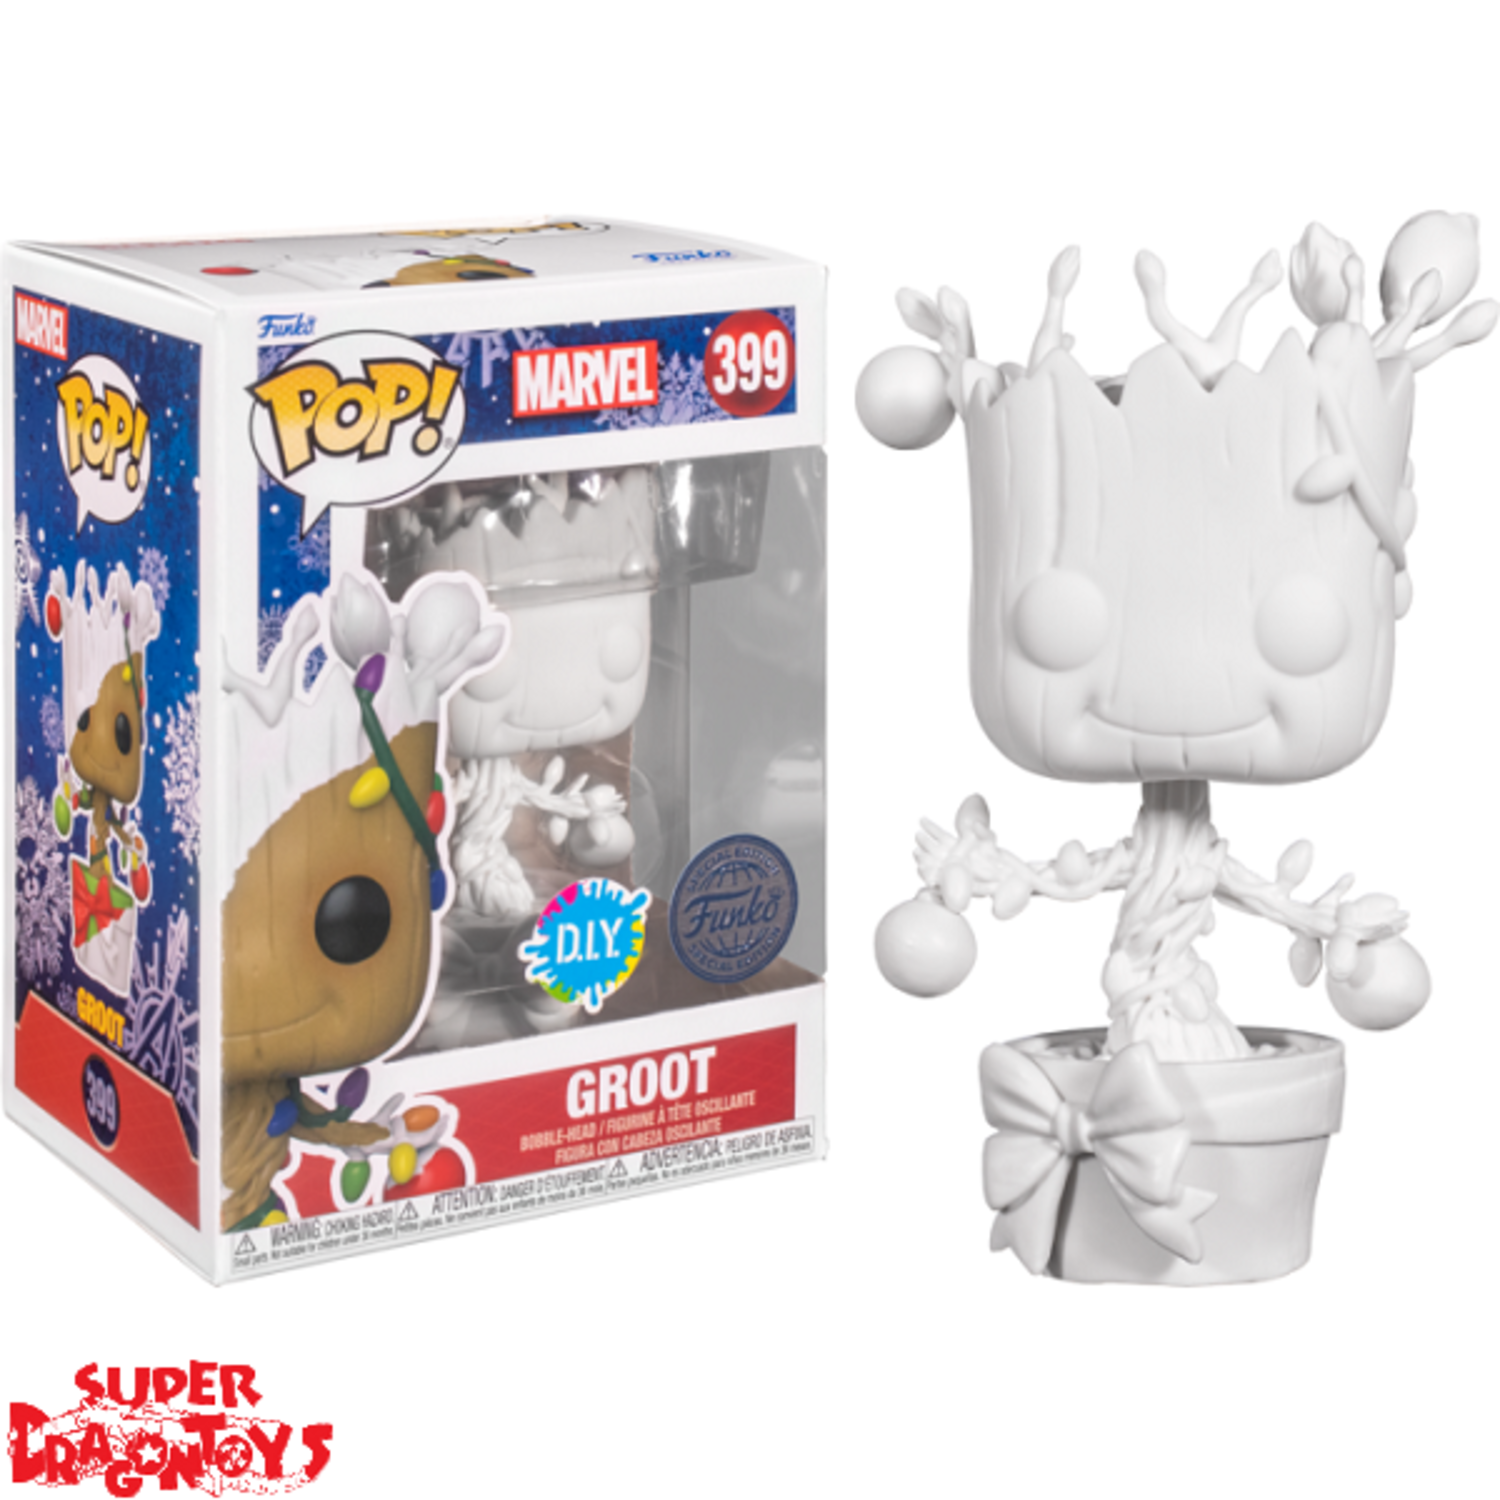 GUARDIANS OF THE GALAXY - GROOT [D.I.Y] - FUNKO POP [SPECIAL EDITION] -  SUPERDRAGONTOYS